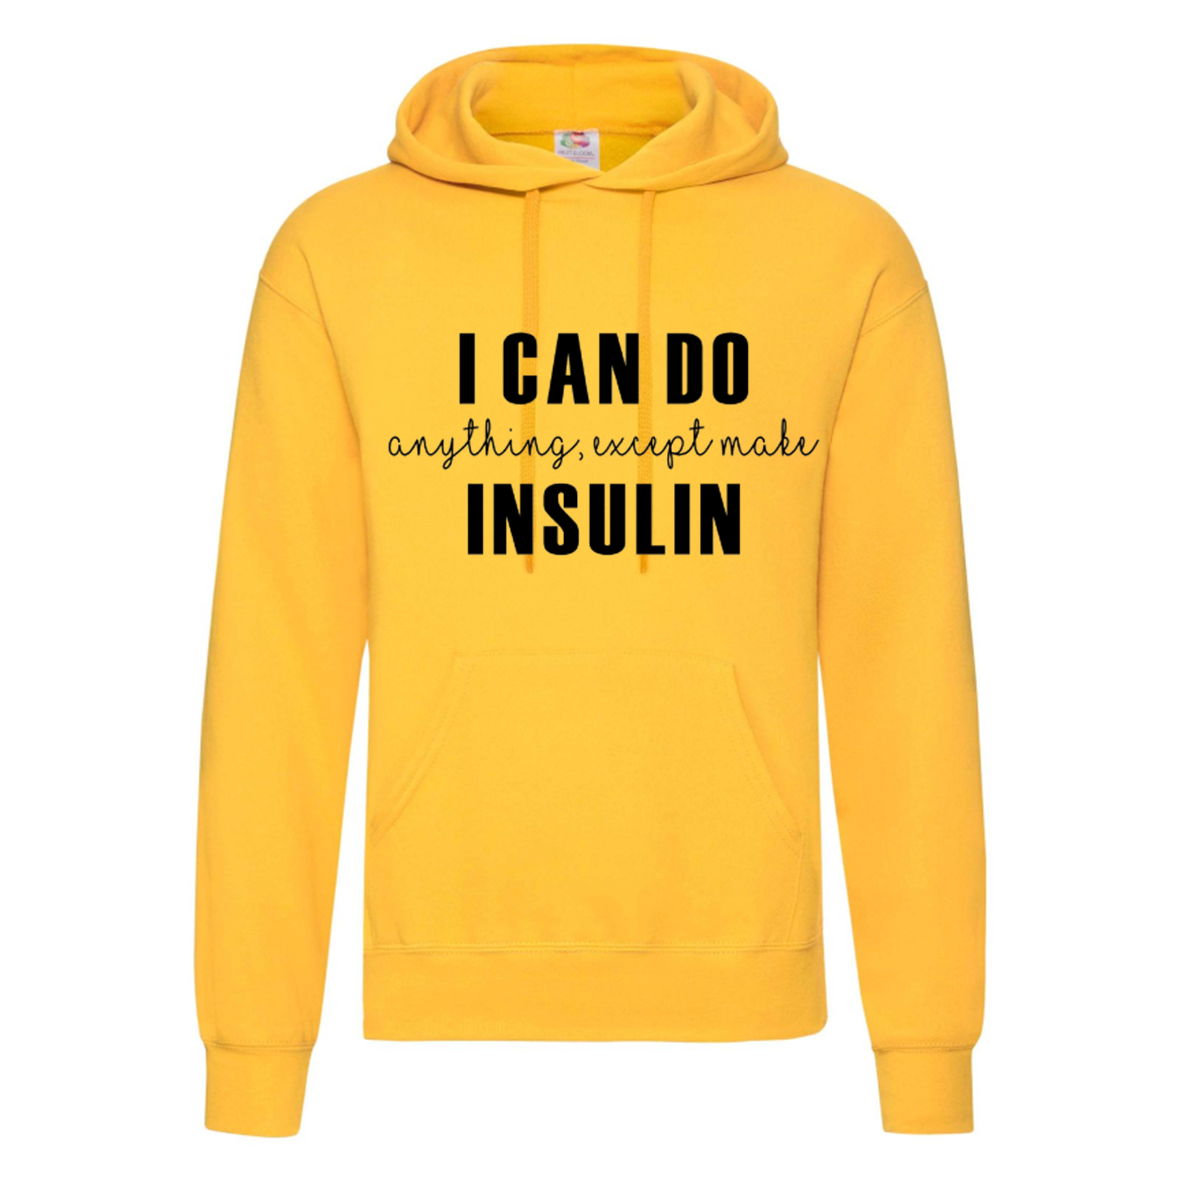 I Can Do Anything, Except Make Insulin Hoodie